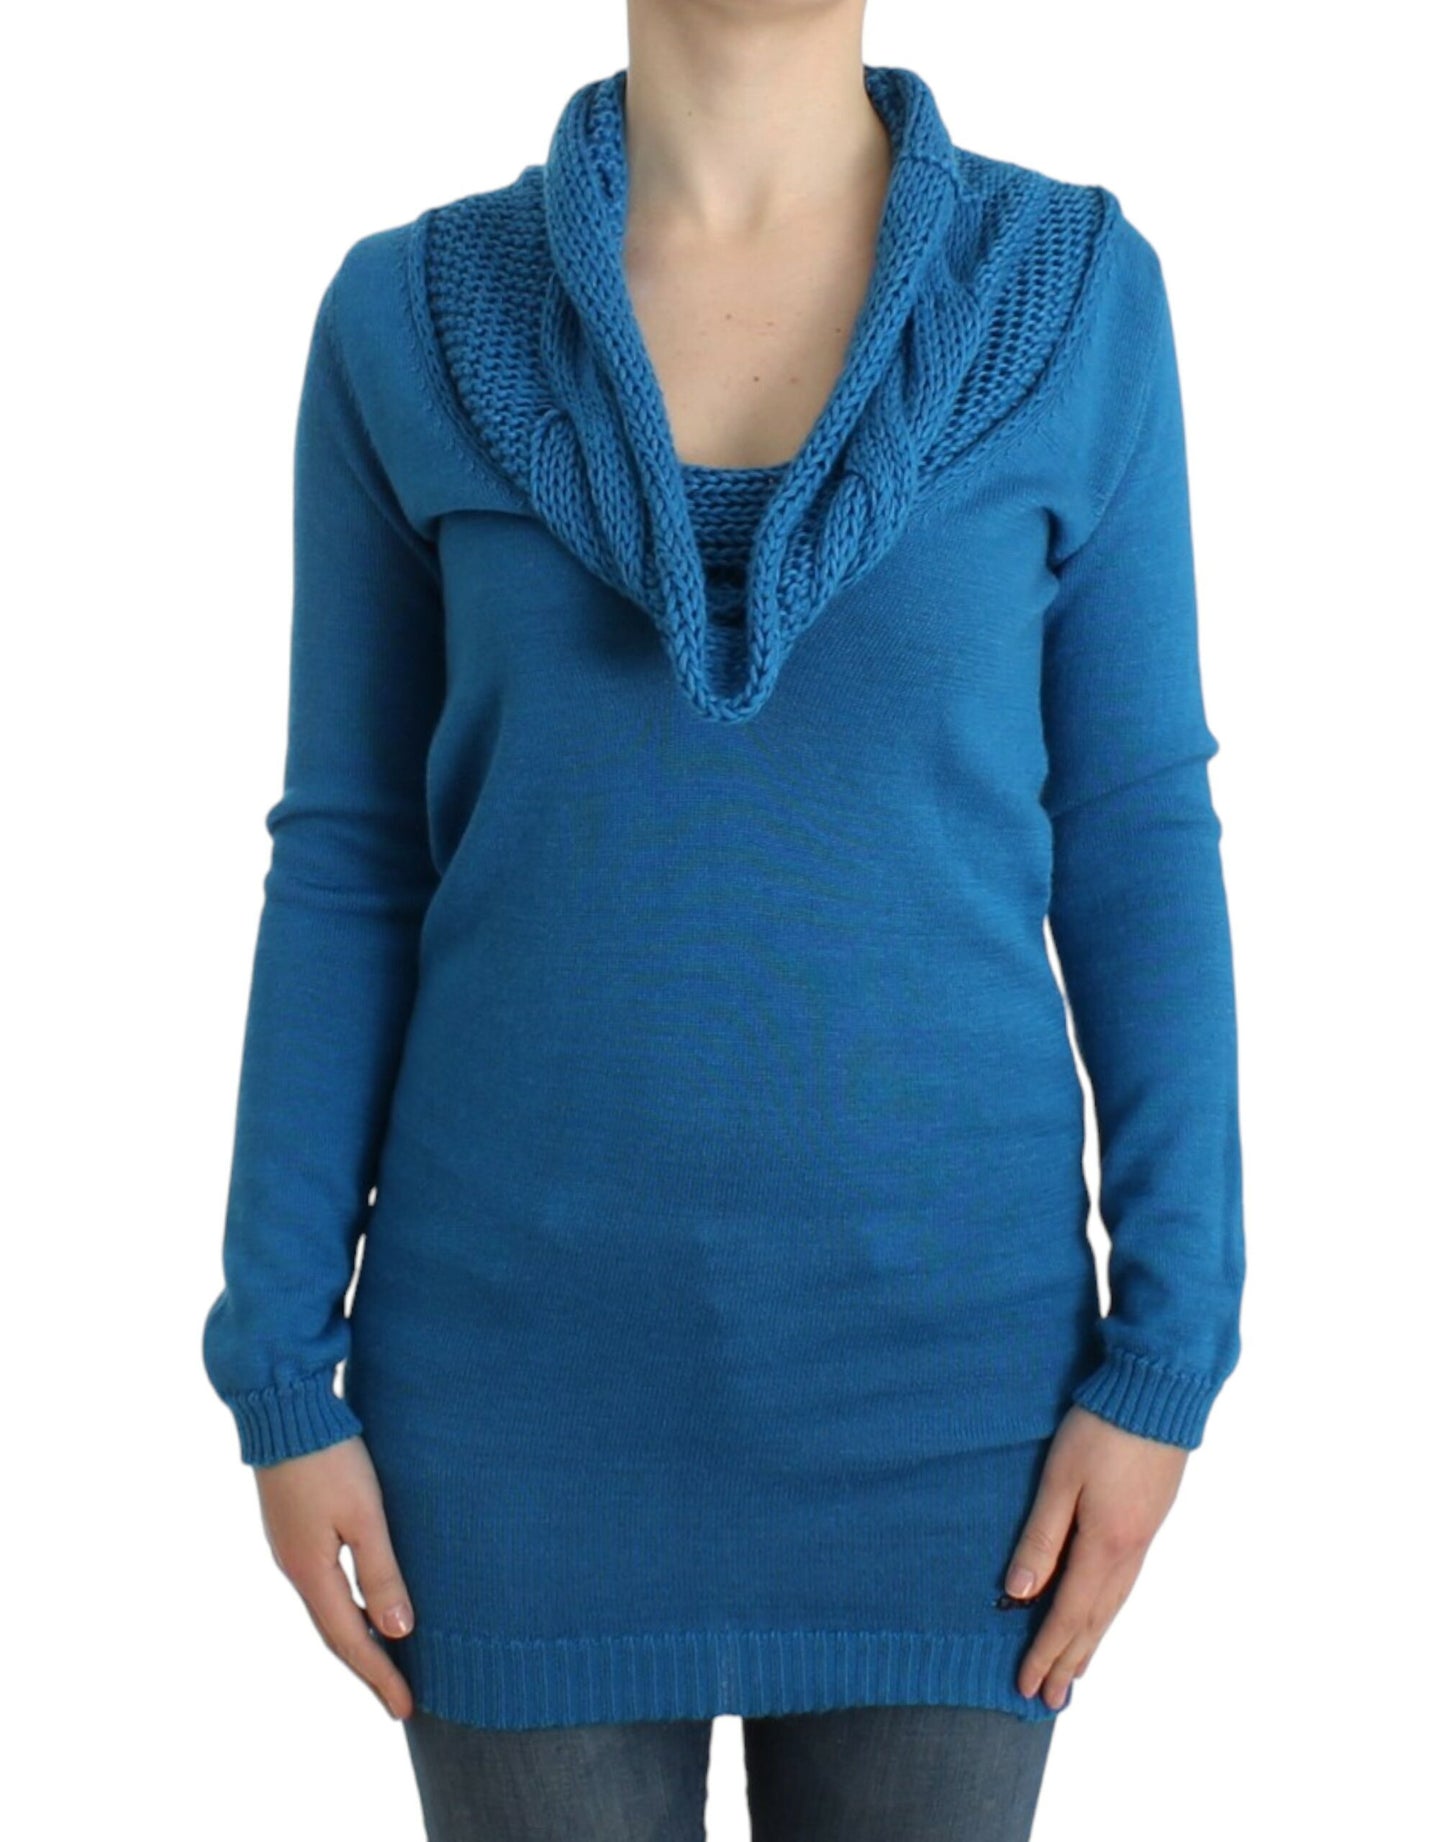 Chic Blue Scoop Neck Knit Sweater